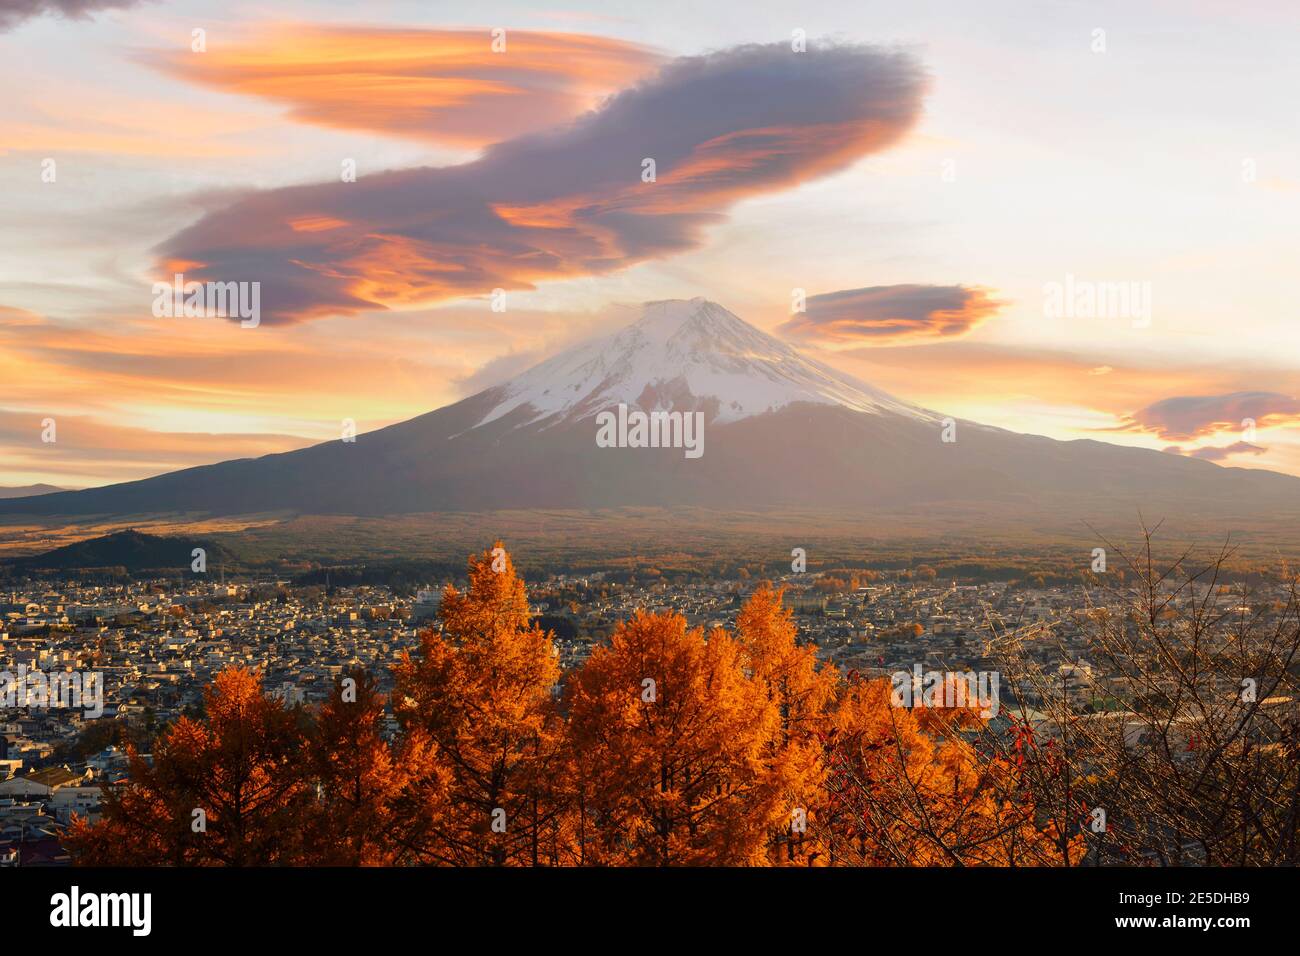 Mount Fuji at sunset with a maple tree in foreground, Honshu, Japan Stock Photo